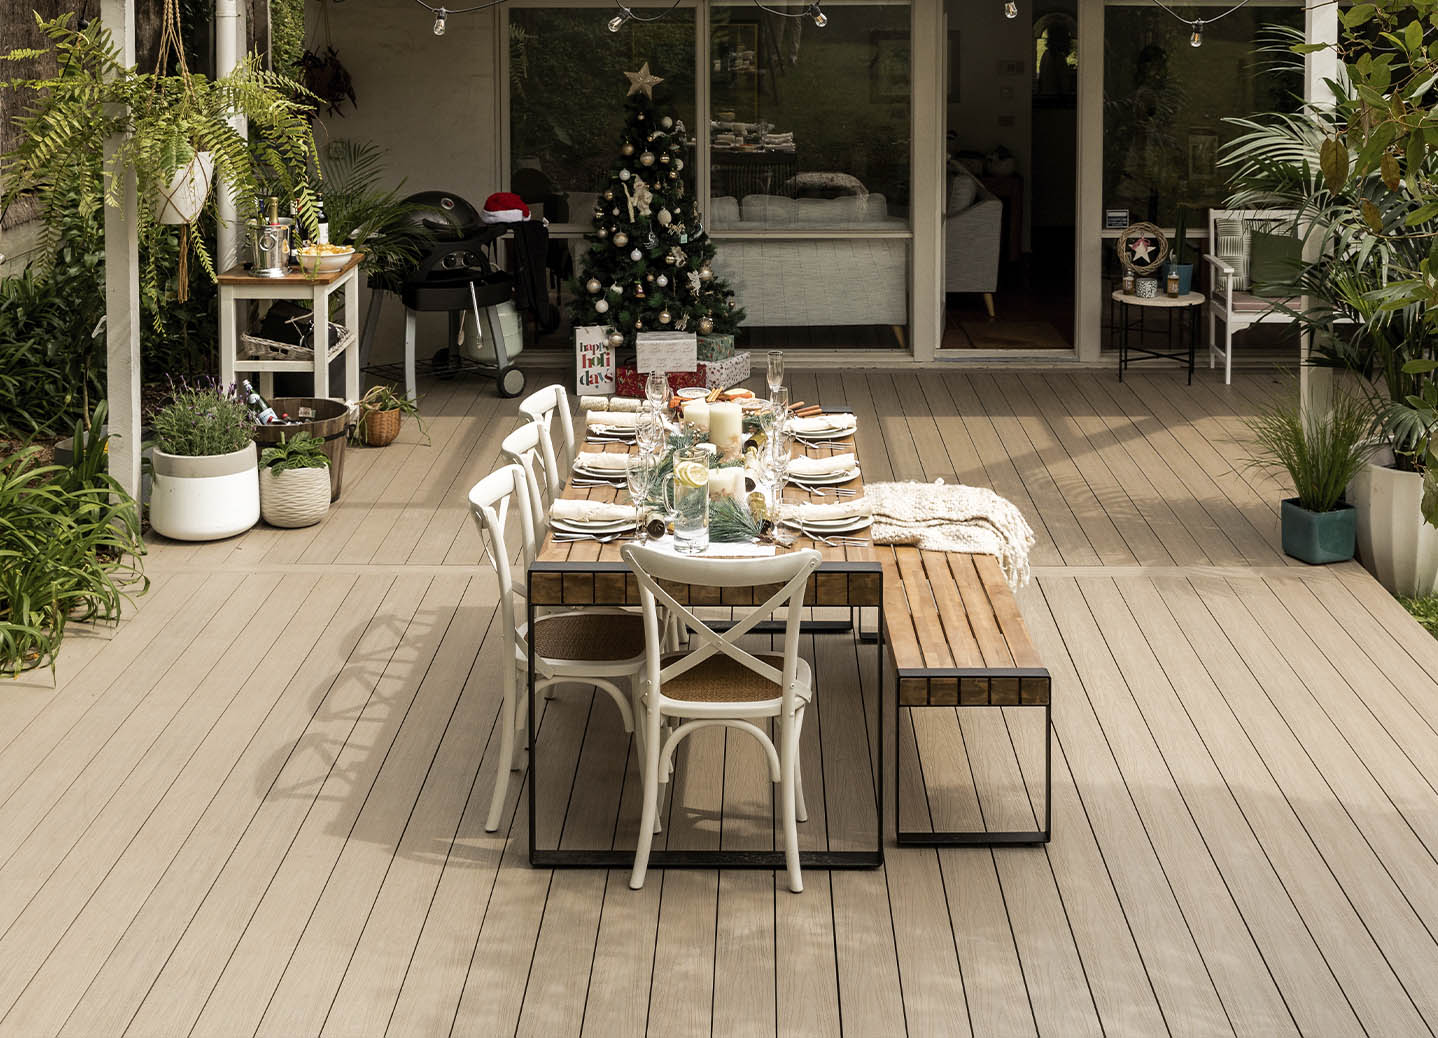 Christmas lunch on outdoor decking